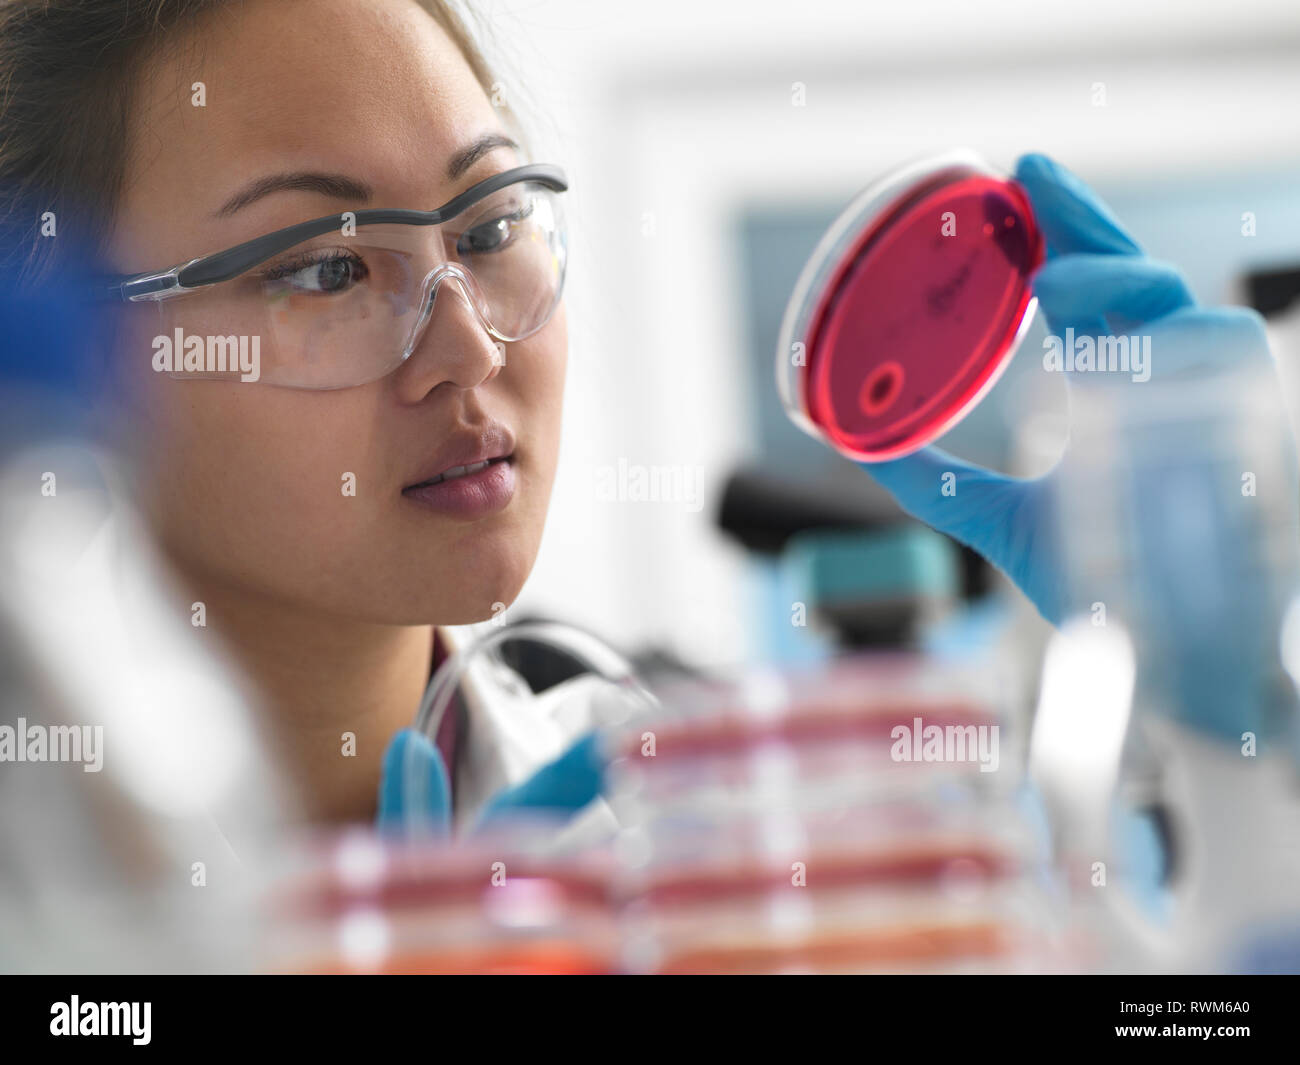 Scientist examining microbiological cultures in petri dishes in laboratory Stock Photo